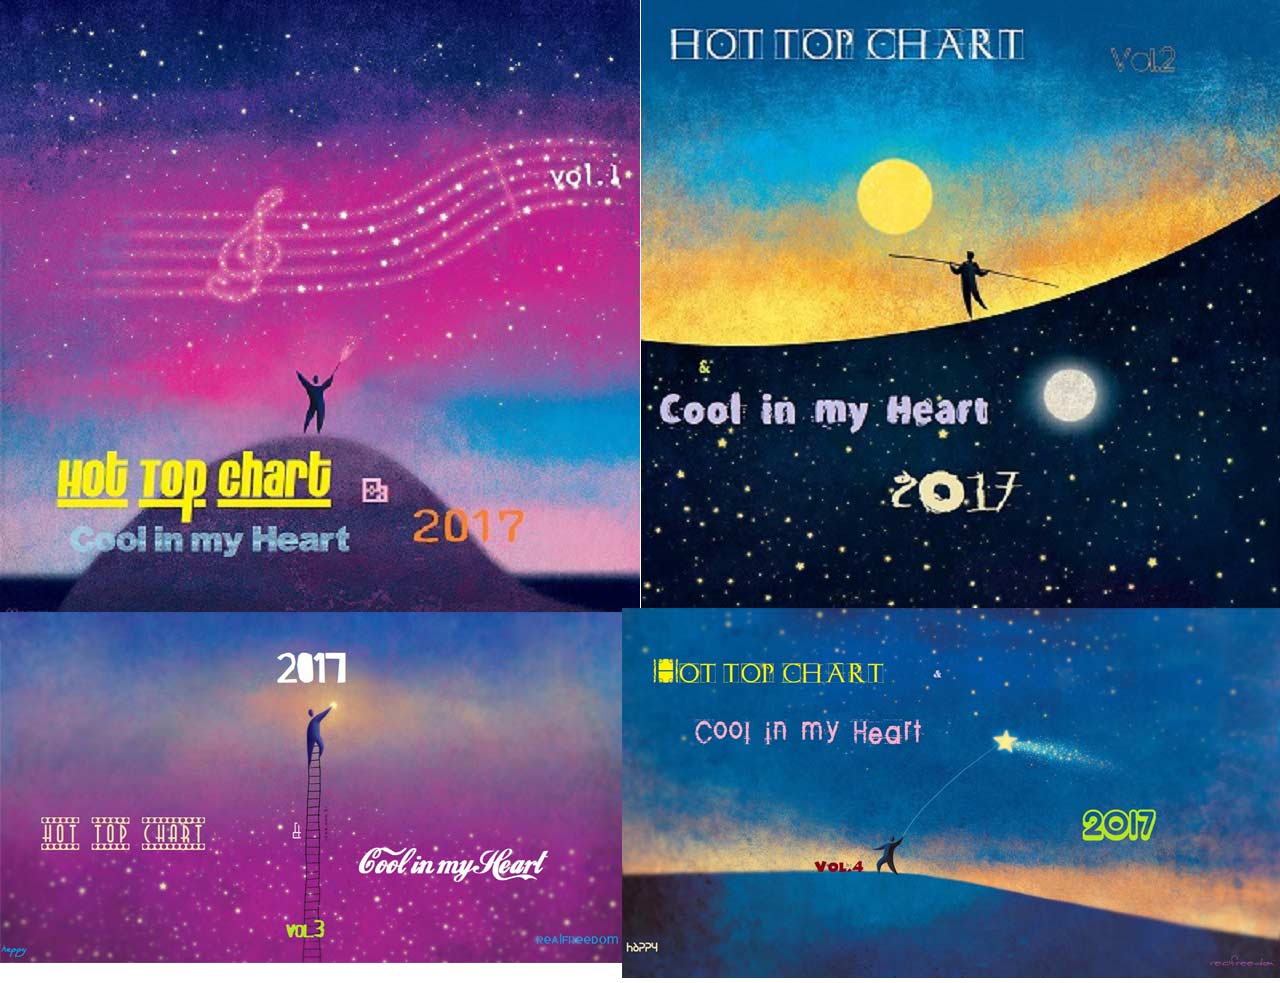 3877 Hot Top Chart & Cool in my Heart 2017 vol.1-2